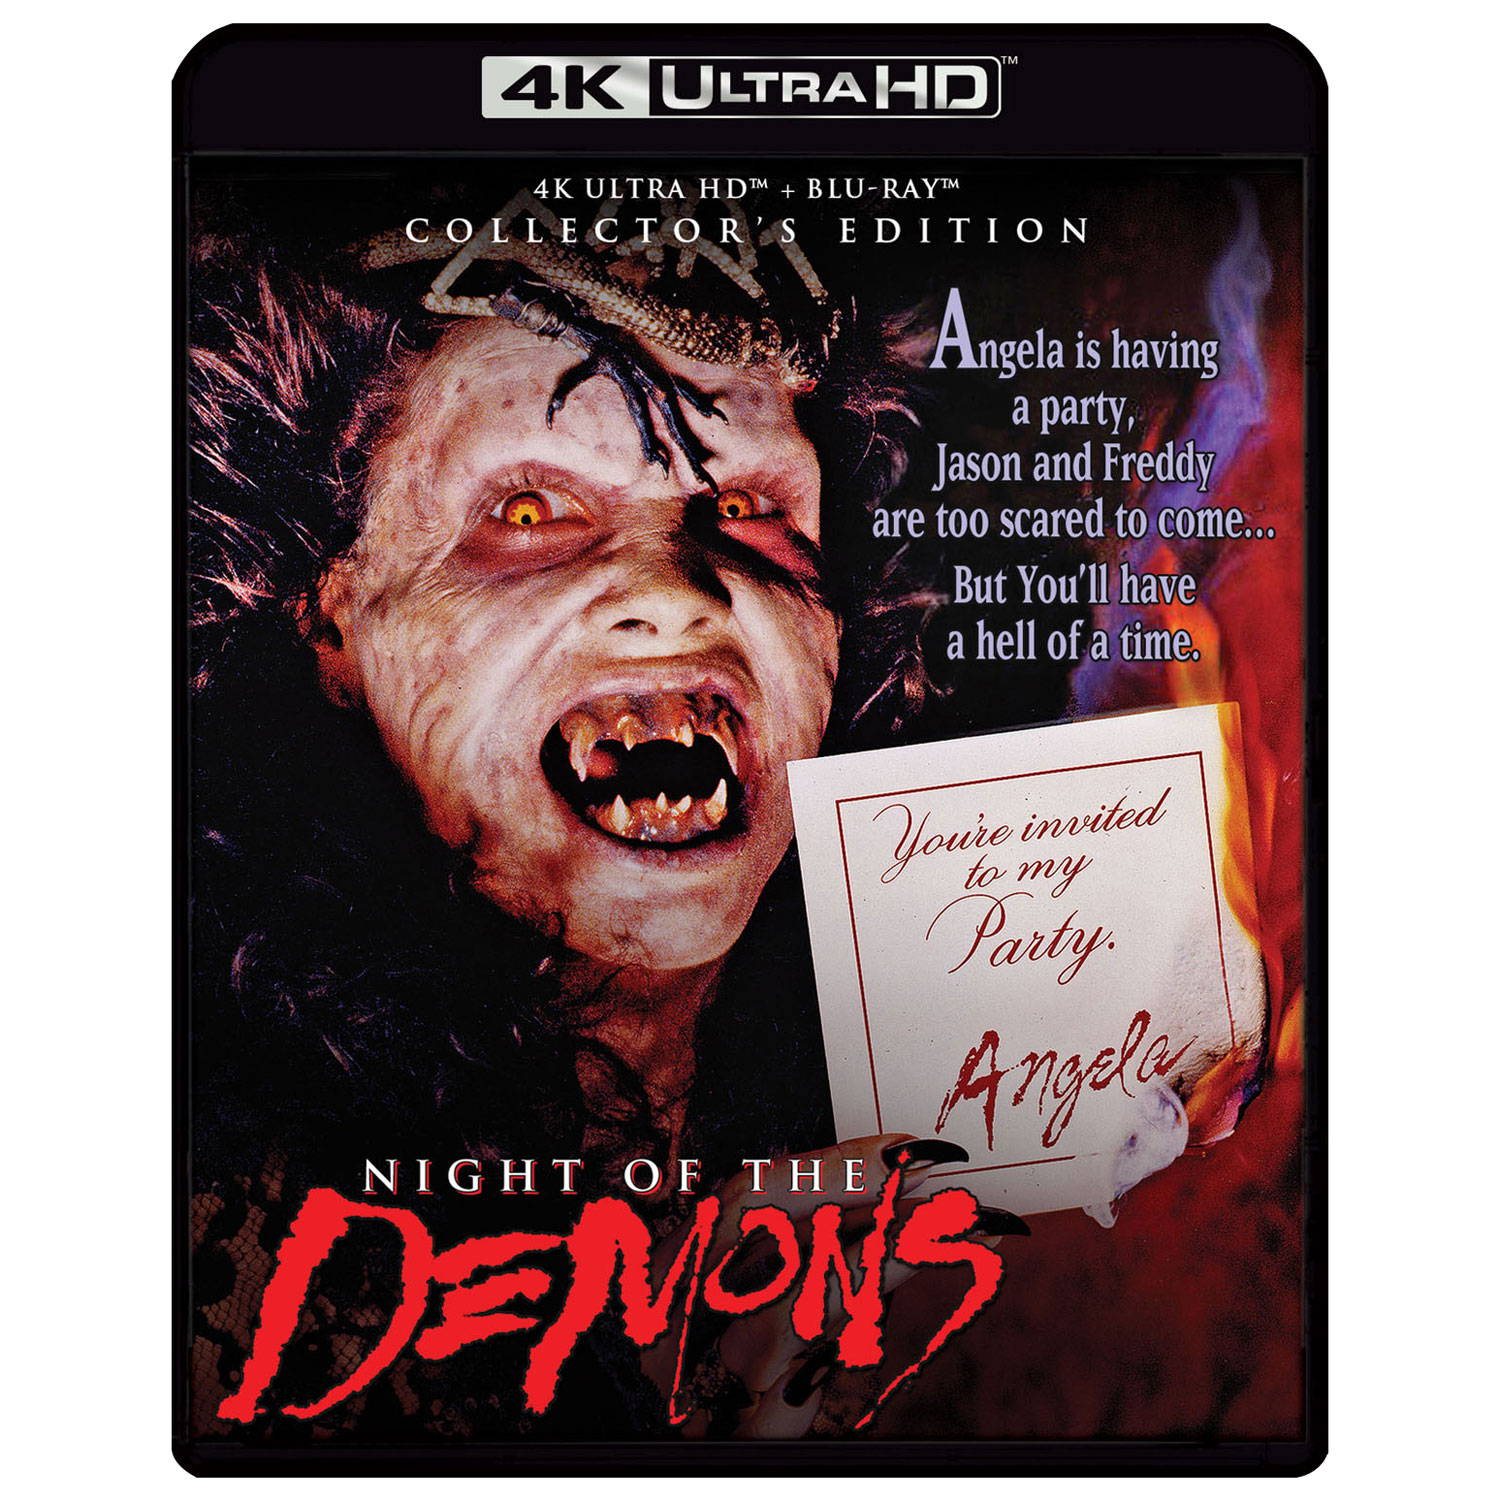 Night of the Demons (Collector's Edition) (English) (4K Ultra HD) (Blu-ray Combo)